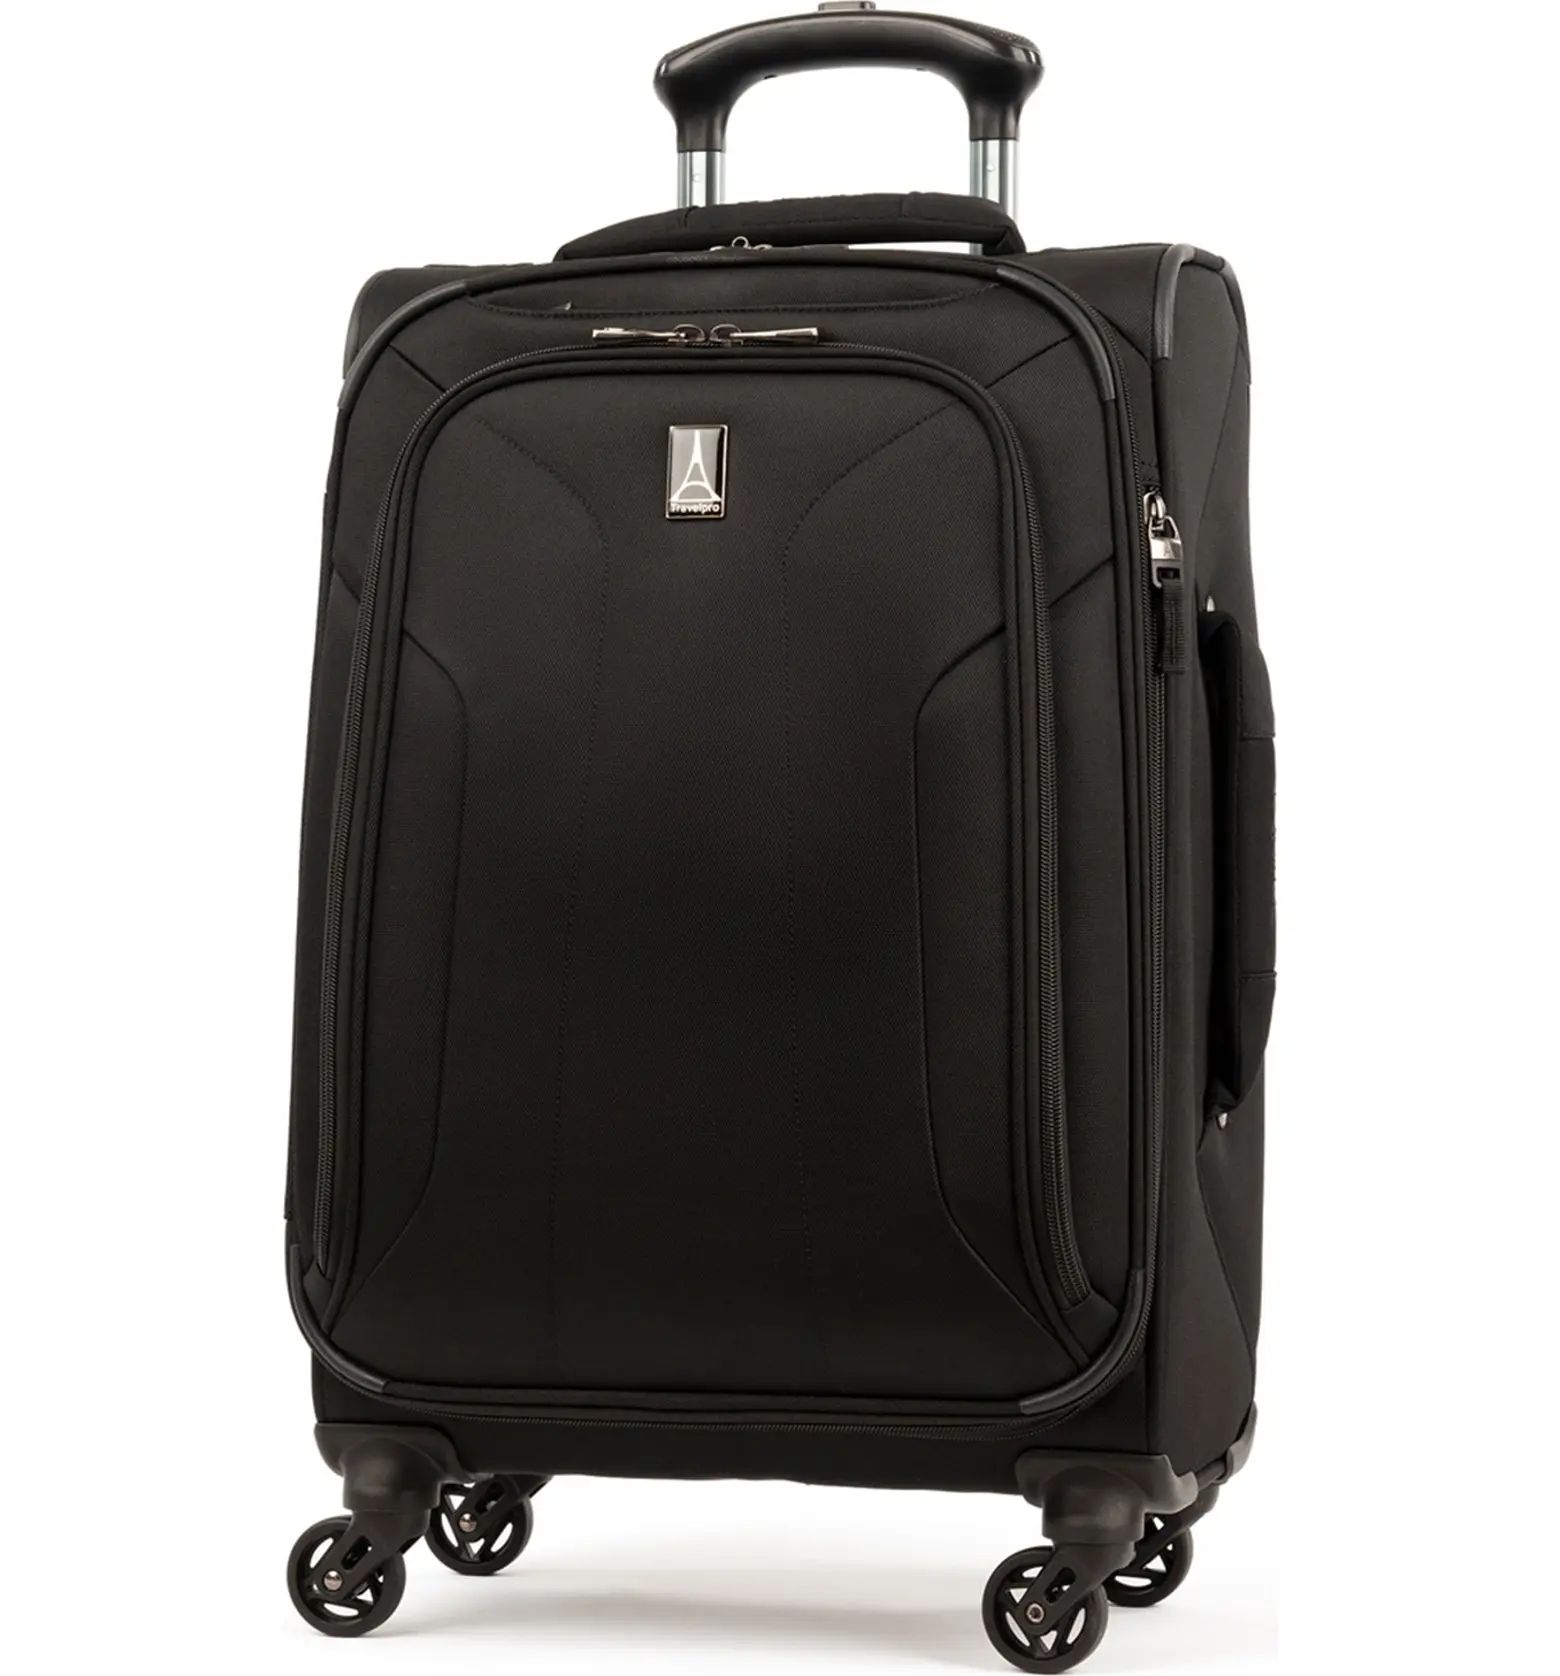 Pilot Air™ Elite 21" Expandable Carry-on Spinner Luggage | Nordstrom Rack